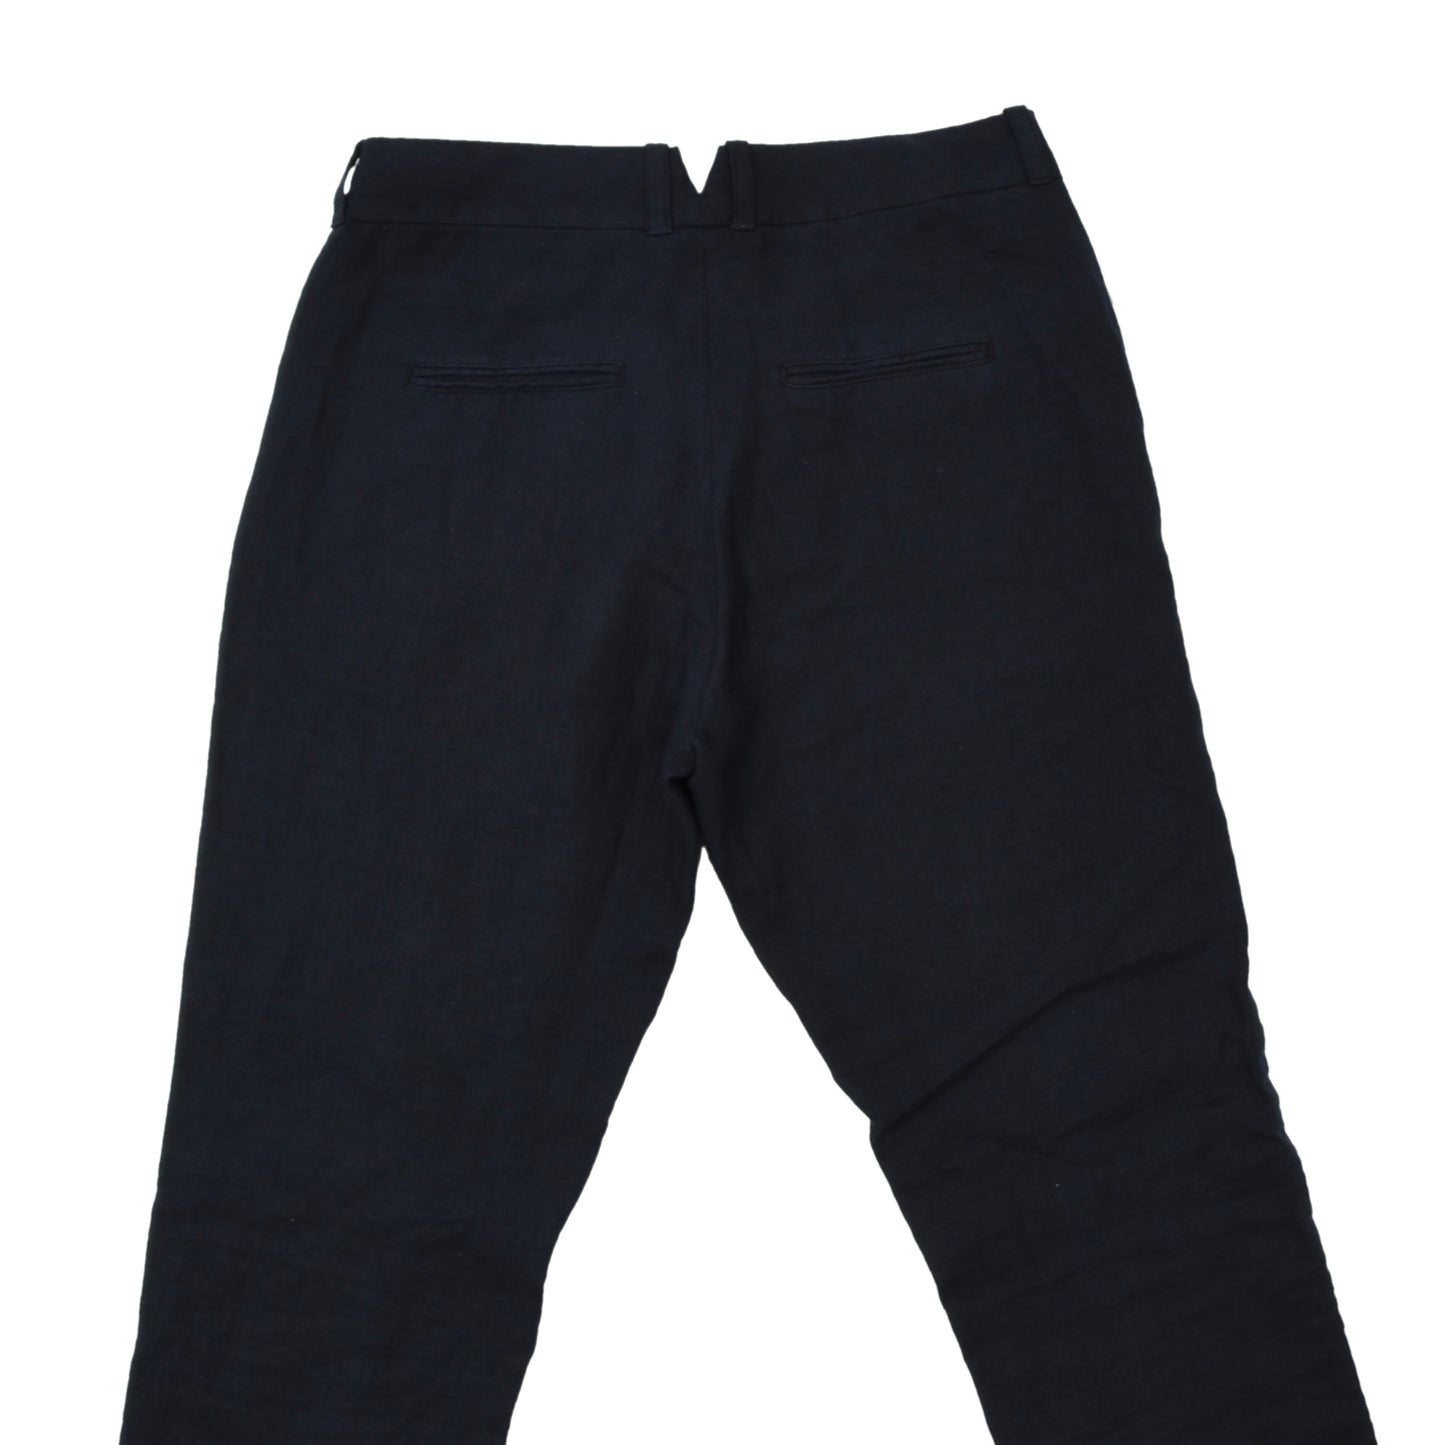 Hannes Roether 100% Linen Pants Size S - Navy Blue